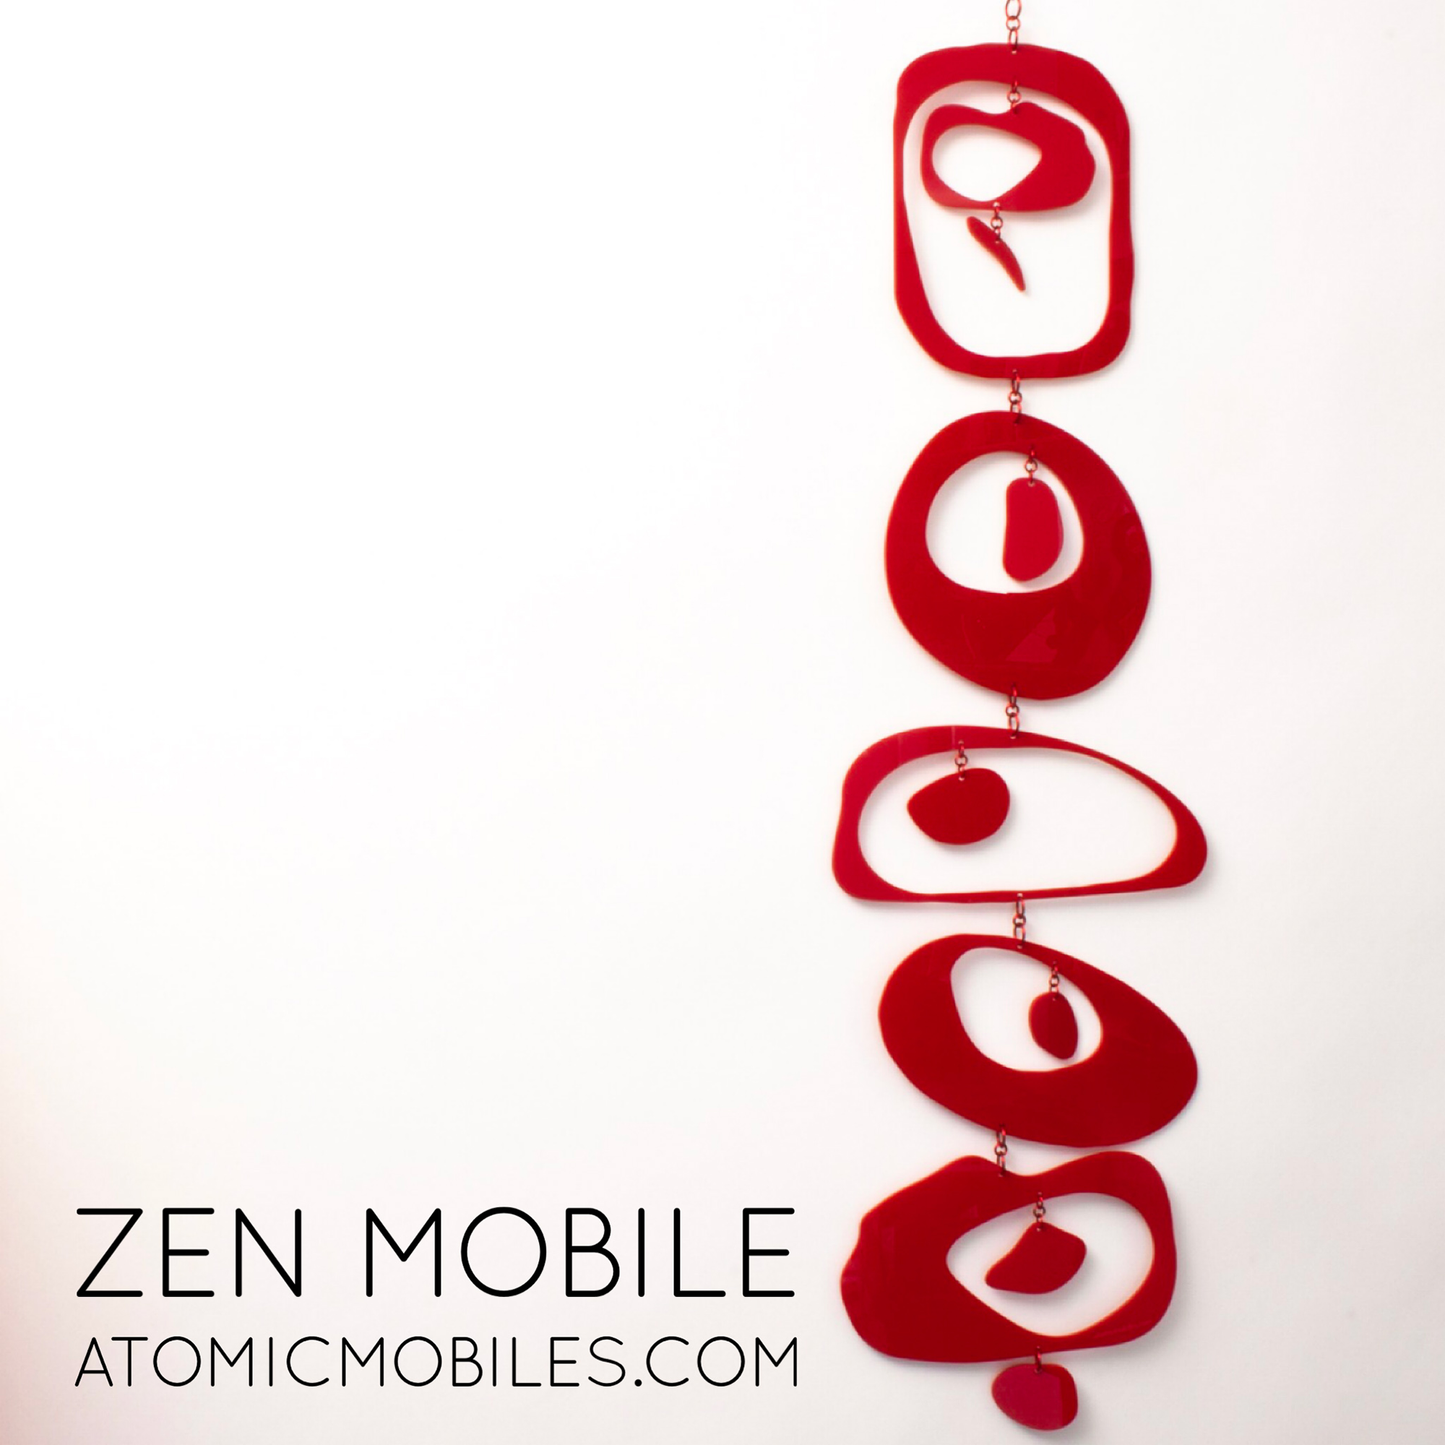 Zen Mobile in Red by AtomicMobiles.com on white background - calm kinetic sculpture inspired by rock balancing